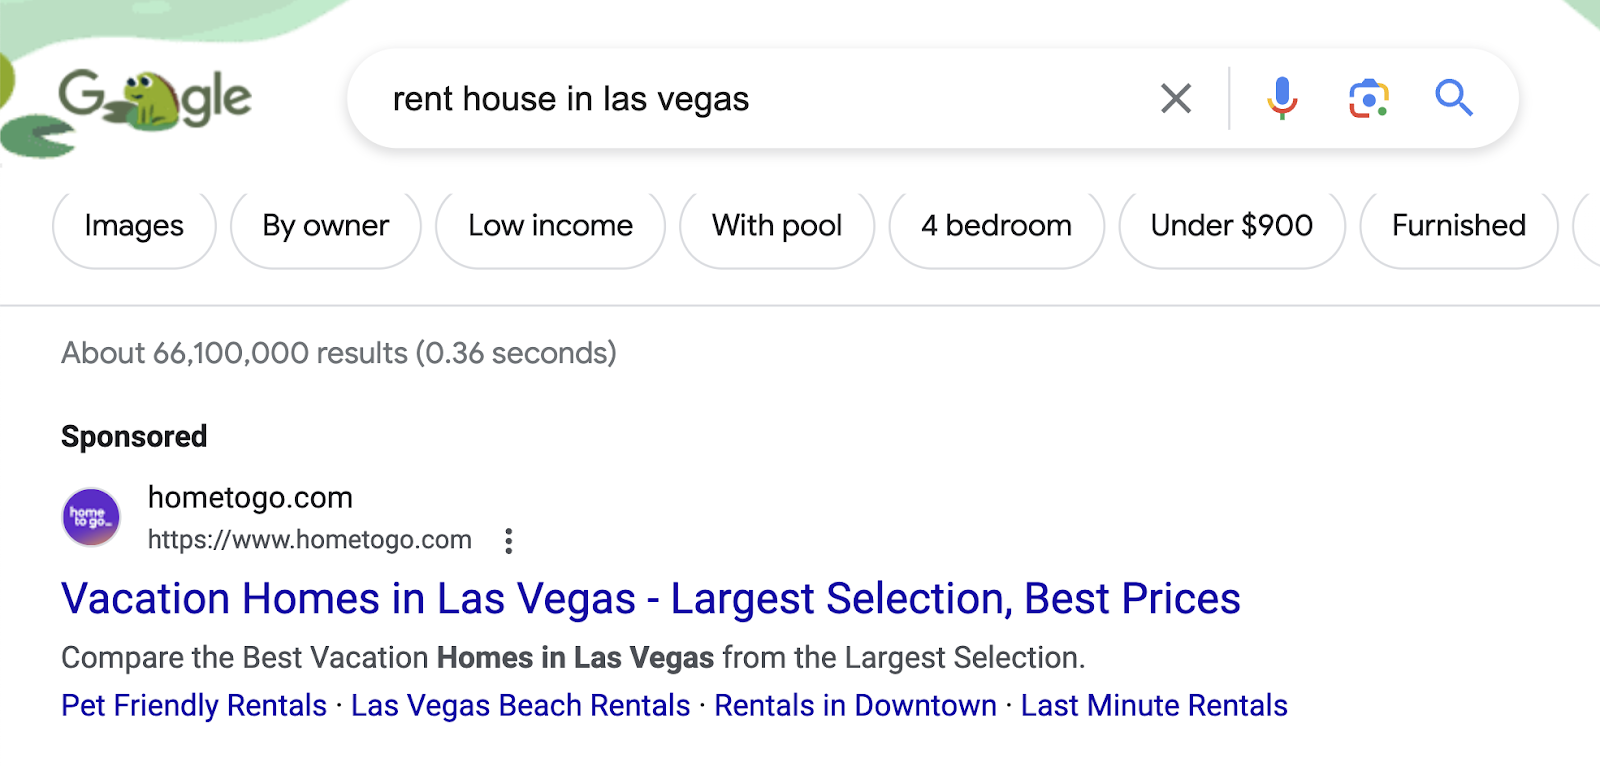 HomeToGo's PPC search ad for "rent house in las vegas" query